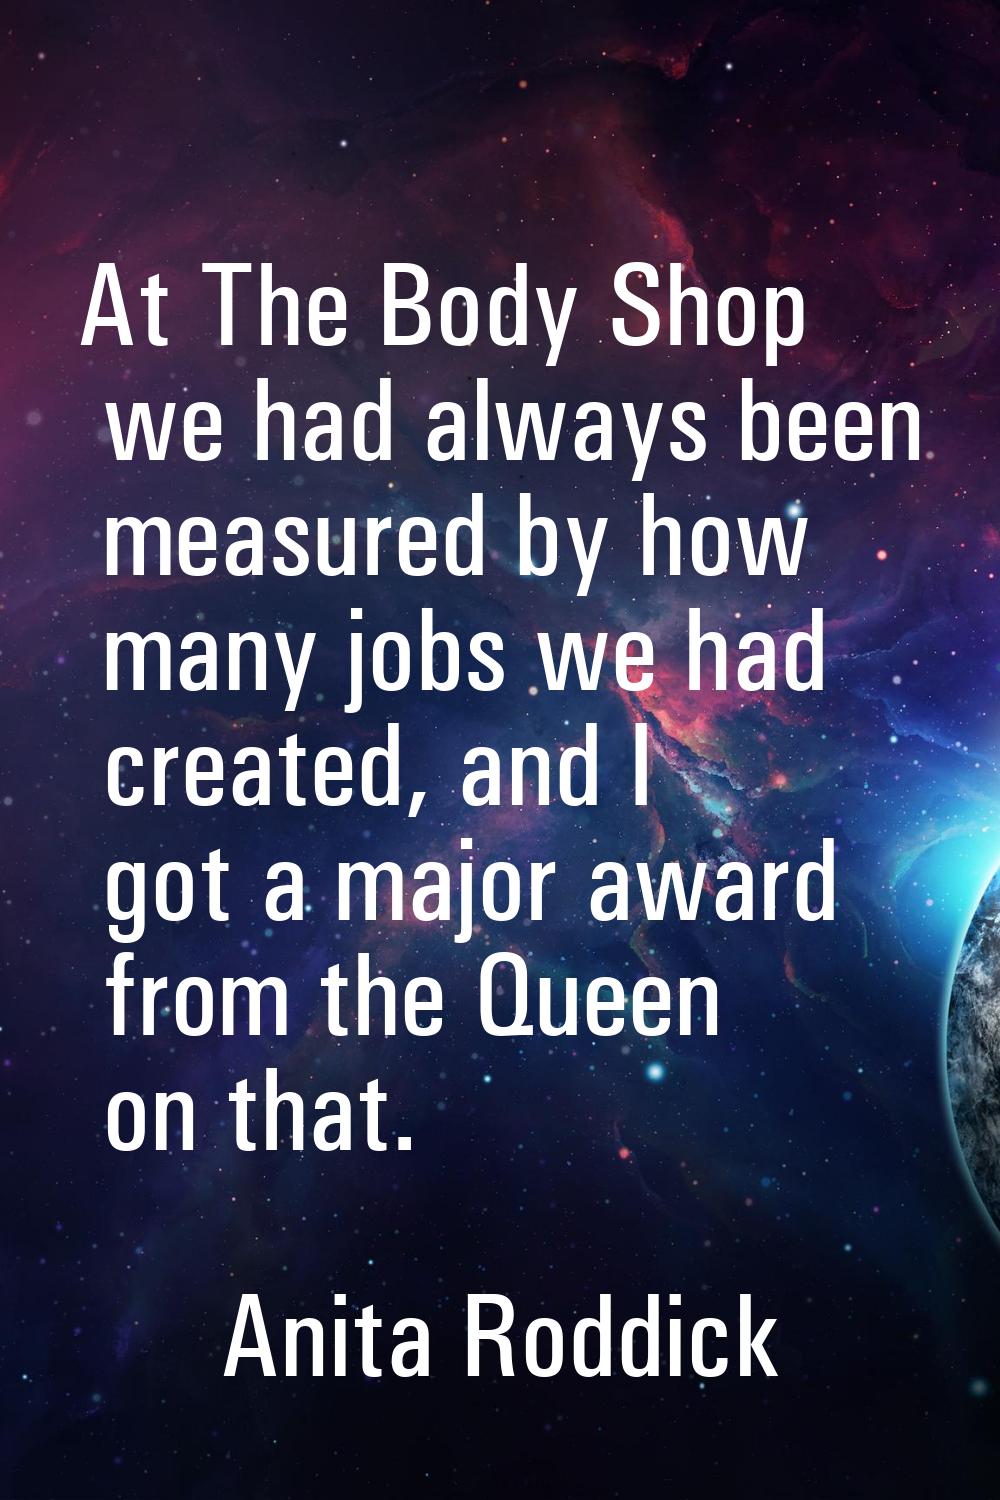 At The Body Shop we had always been measured by how many jobs we had created, and I got a major awa